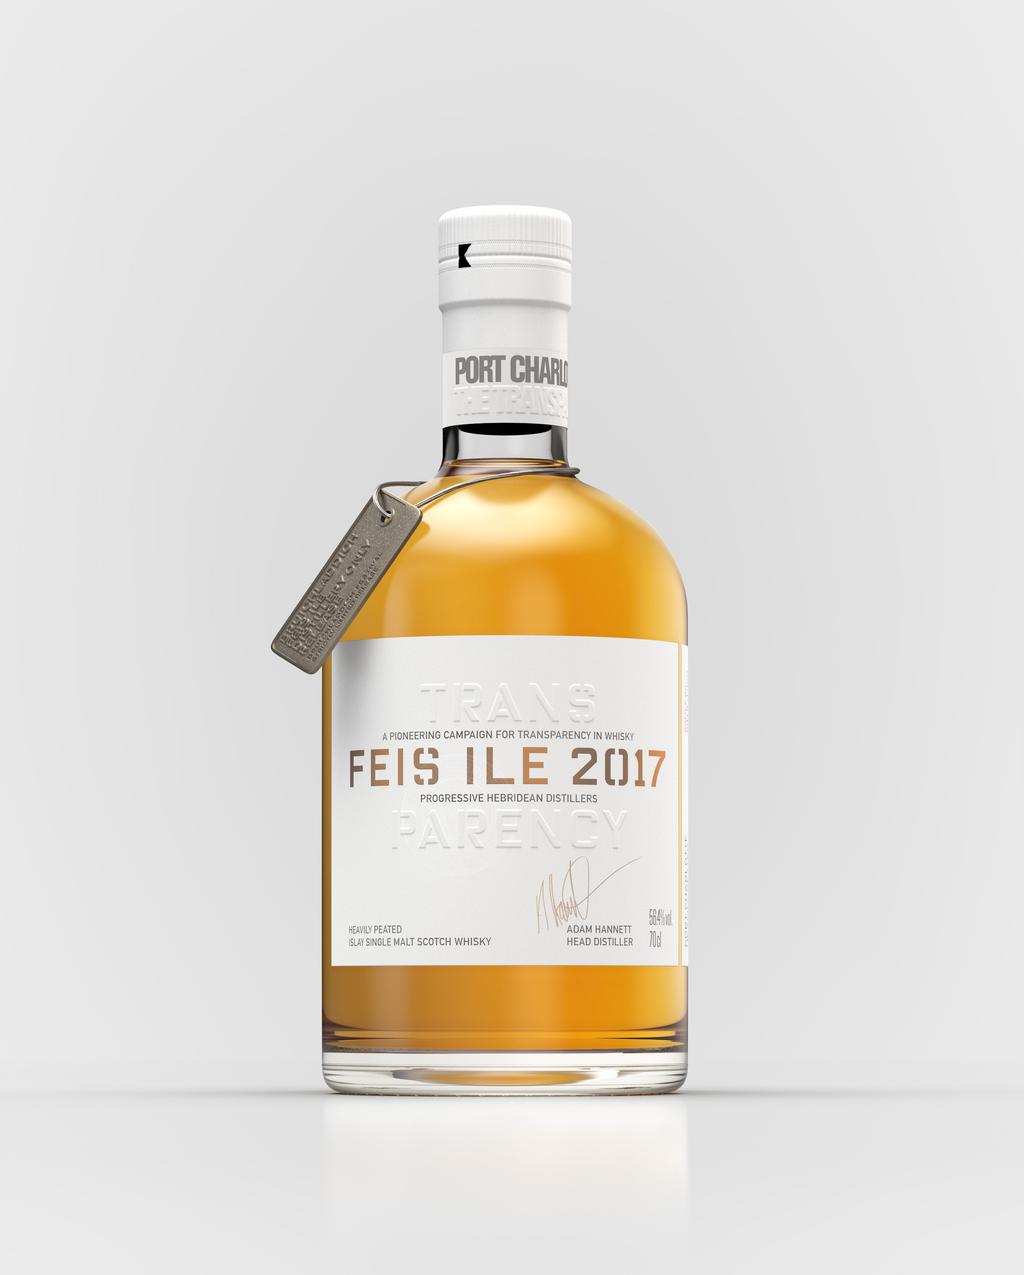 Twelve casks of seven different types have been deployed in the crafting of Transparency. 1,000 bottles of this new multi-vintage Port Charlotte have been released to celebrate Feis Ile 2017.